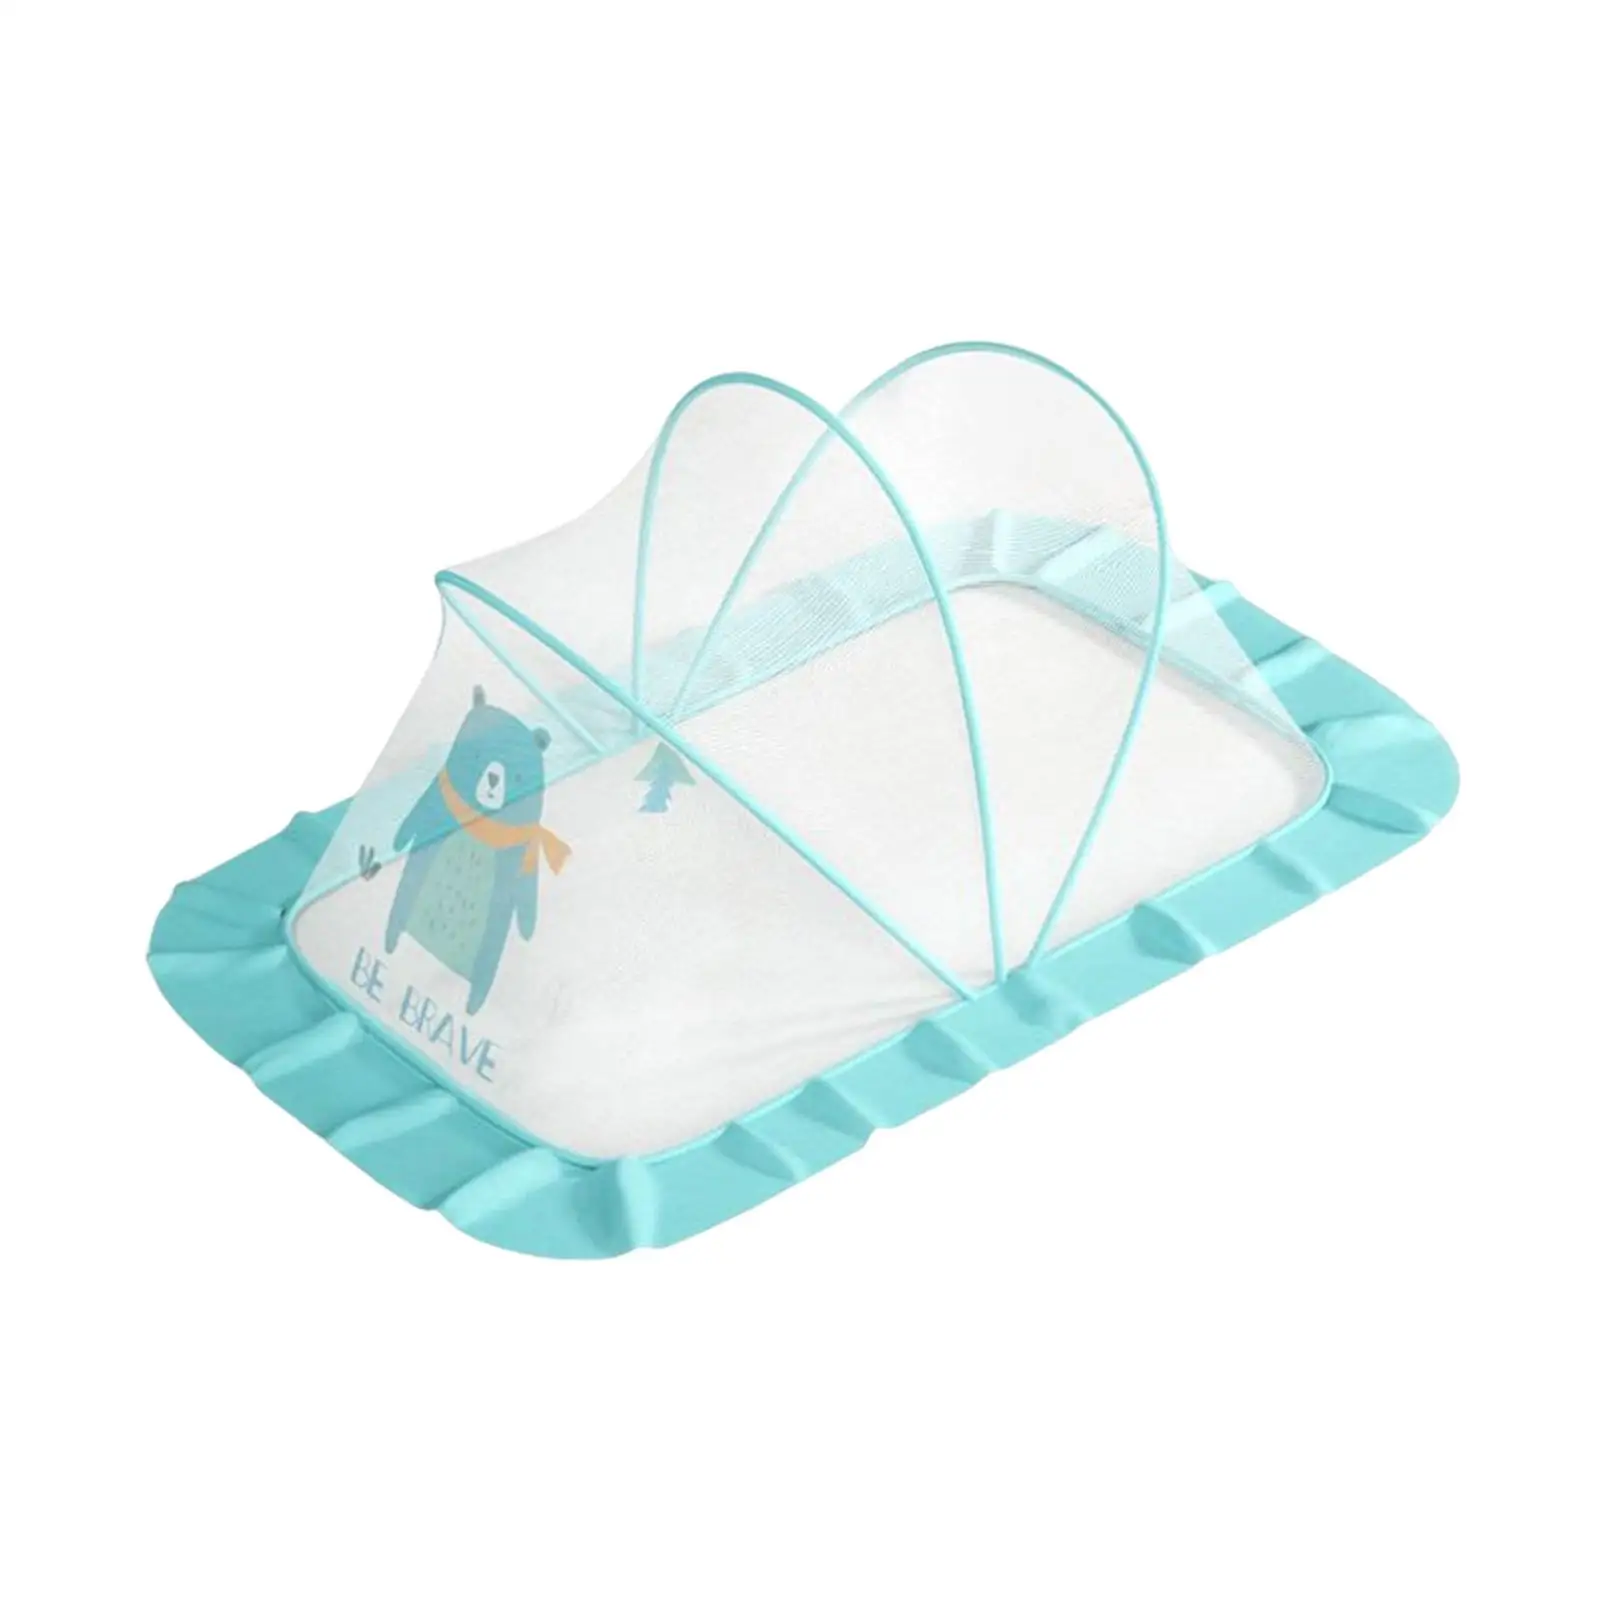 Folding Baby Cots Net ,beds Cover ,High Density Grids Bottomless Lightweight for Kids, Toddlers